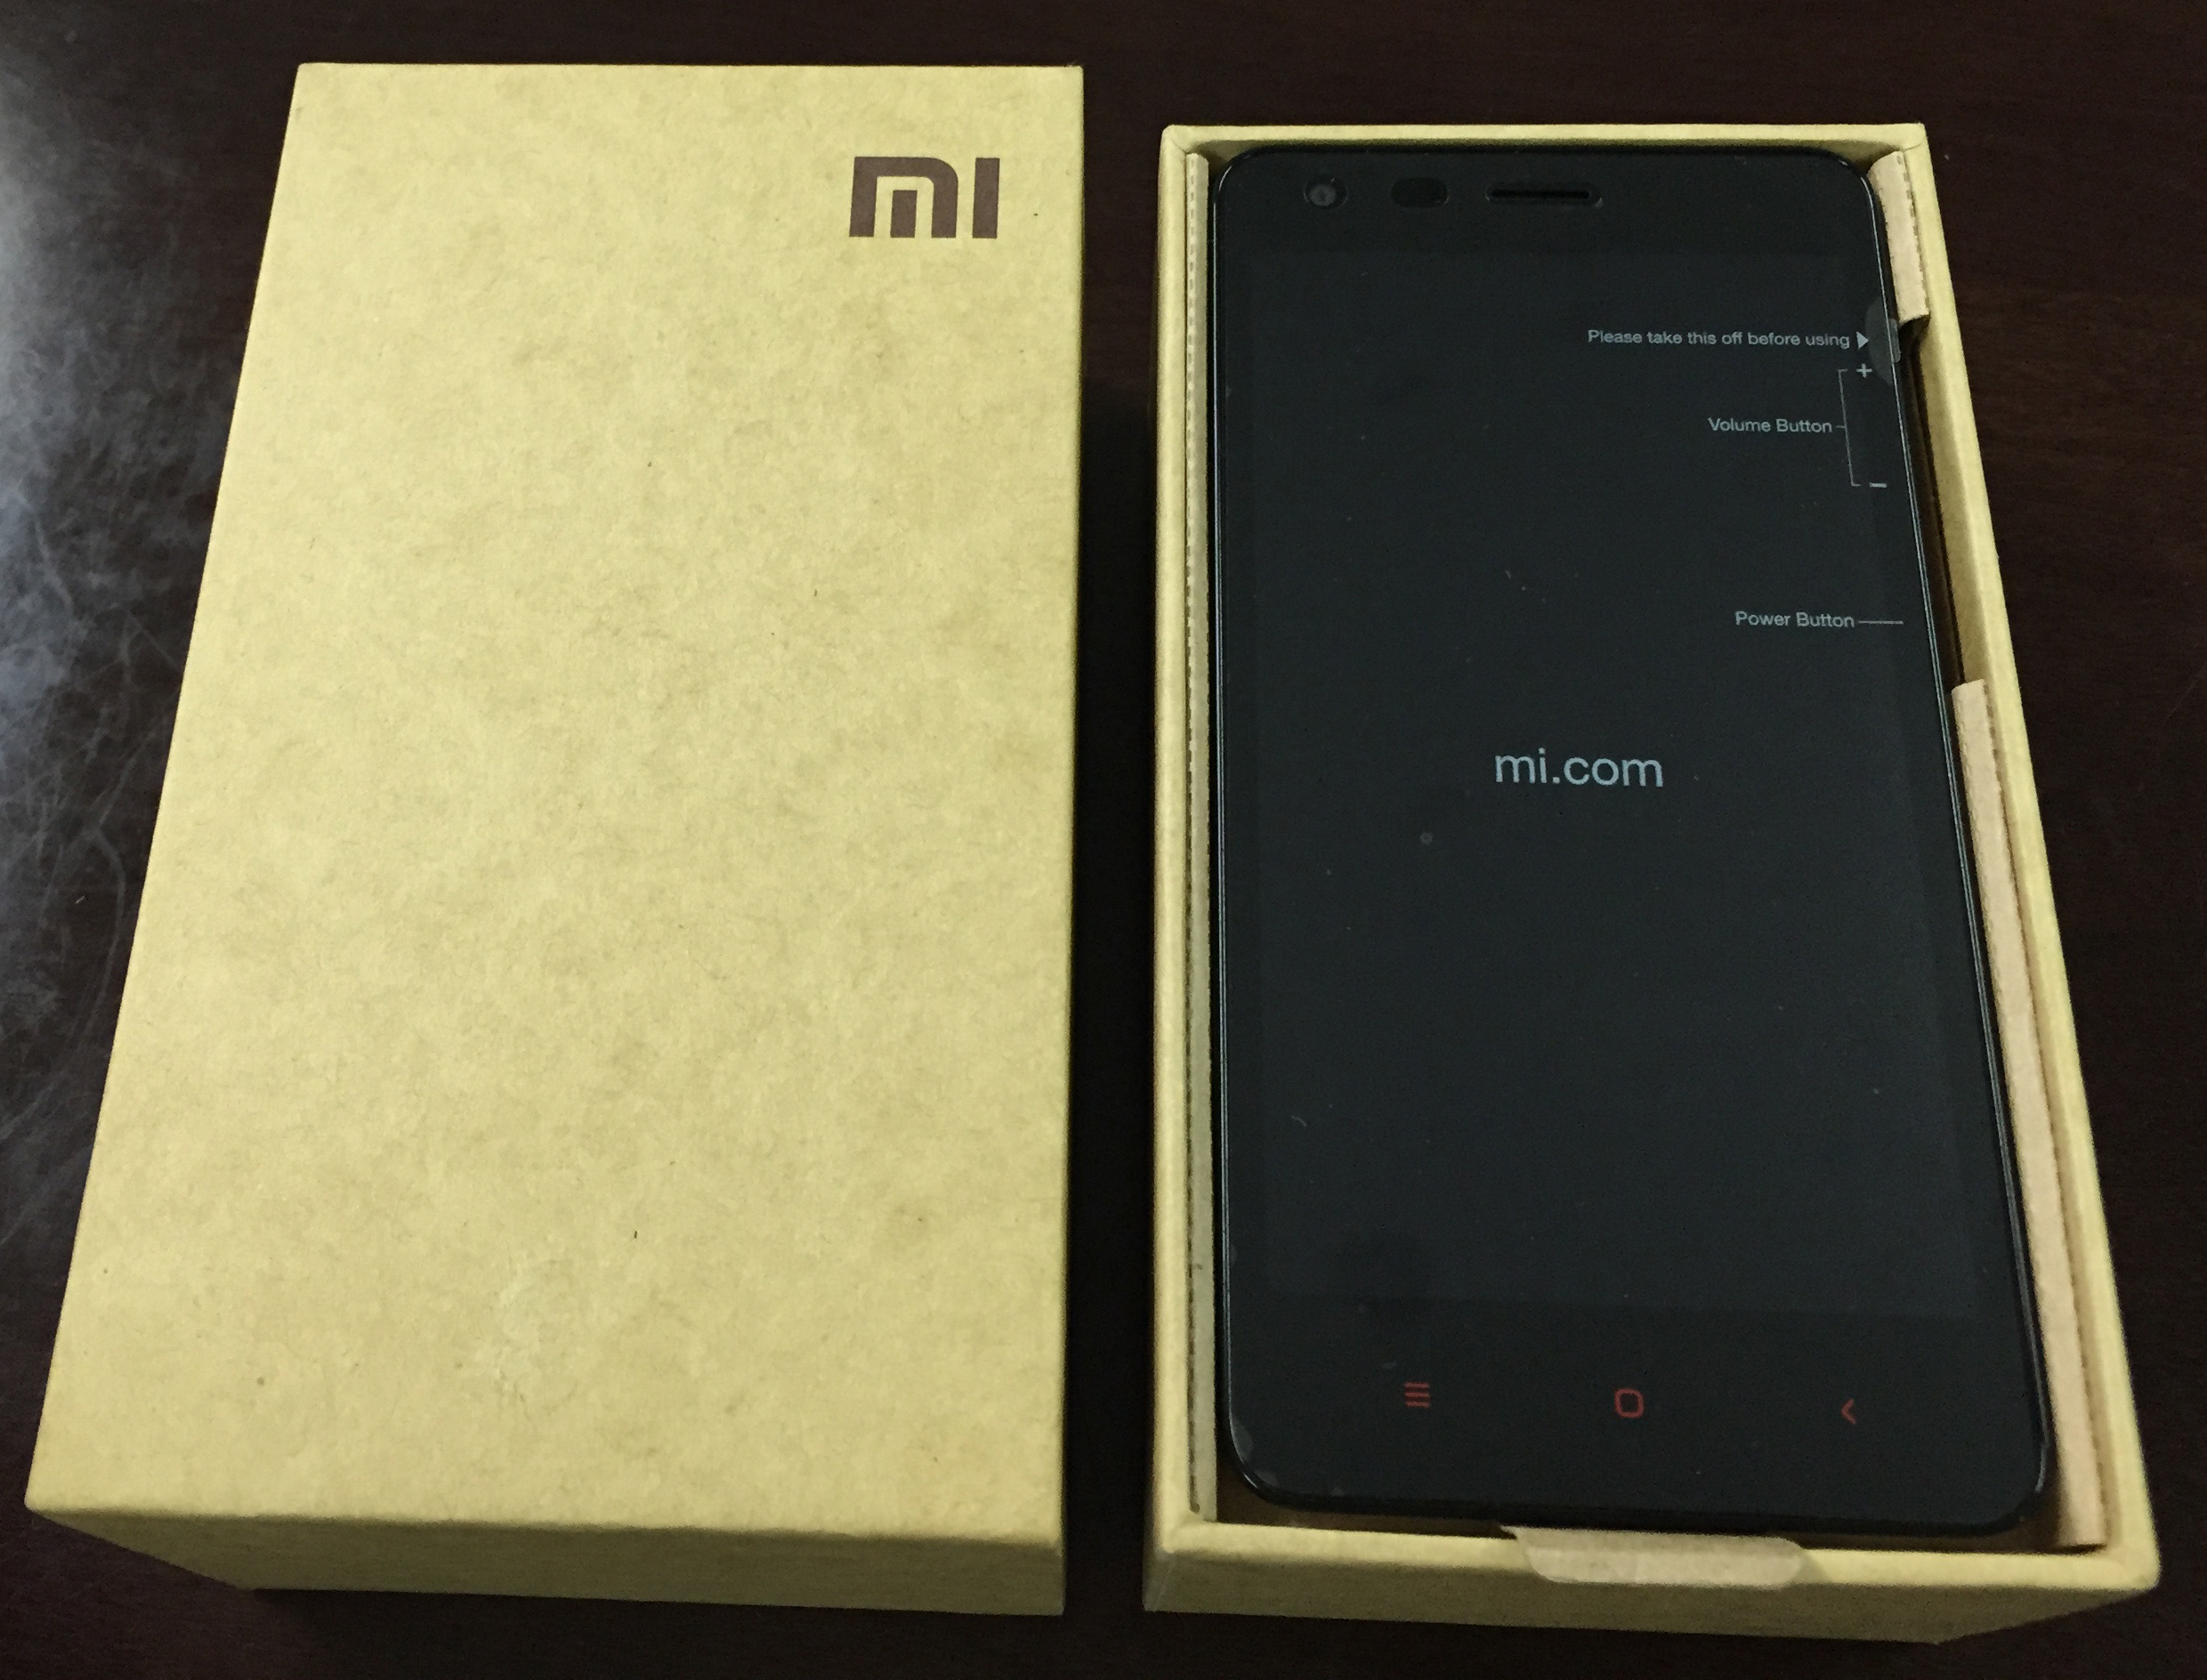 Xiaomi Redmi 2 Android smartphone running on 4.4 Kitkat unboxing review